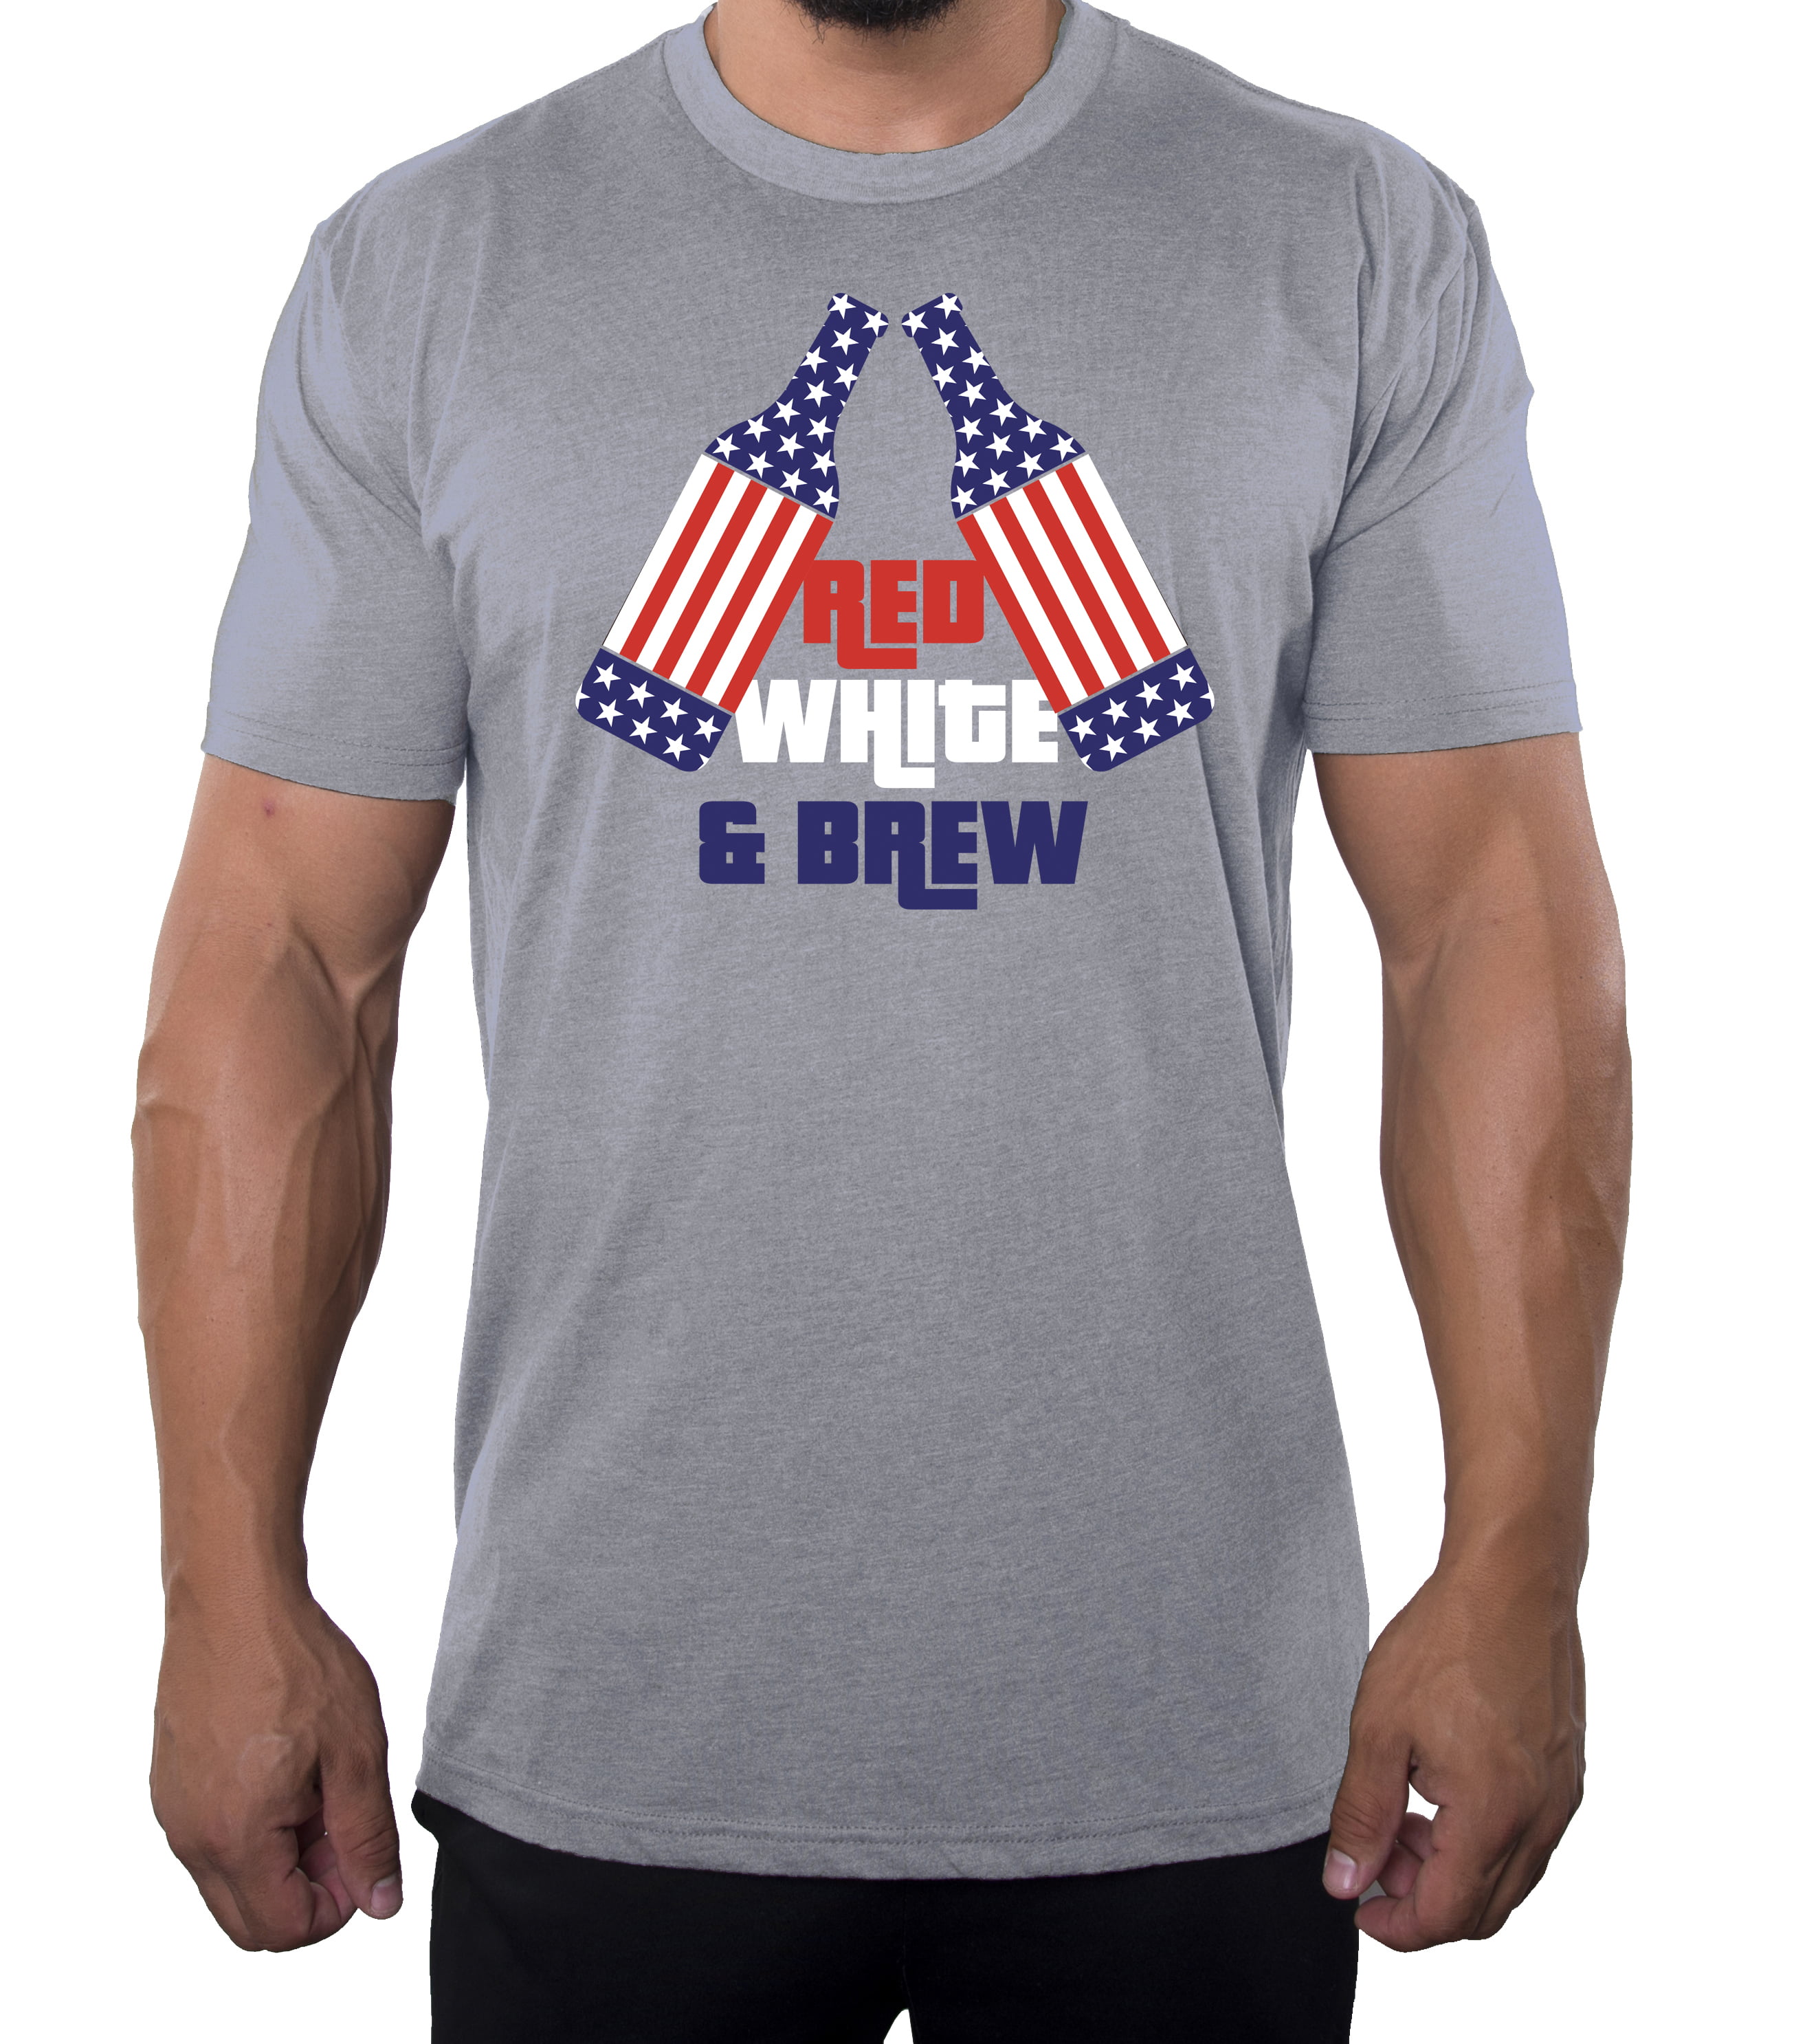 Beer Shirt Fourth Of July Shirt Red White And Blue Shirt 4th Of July Shirt Natural Light Beer Shirt Red White And Brew Shirt